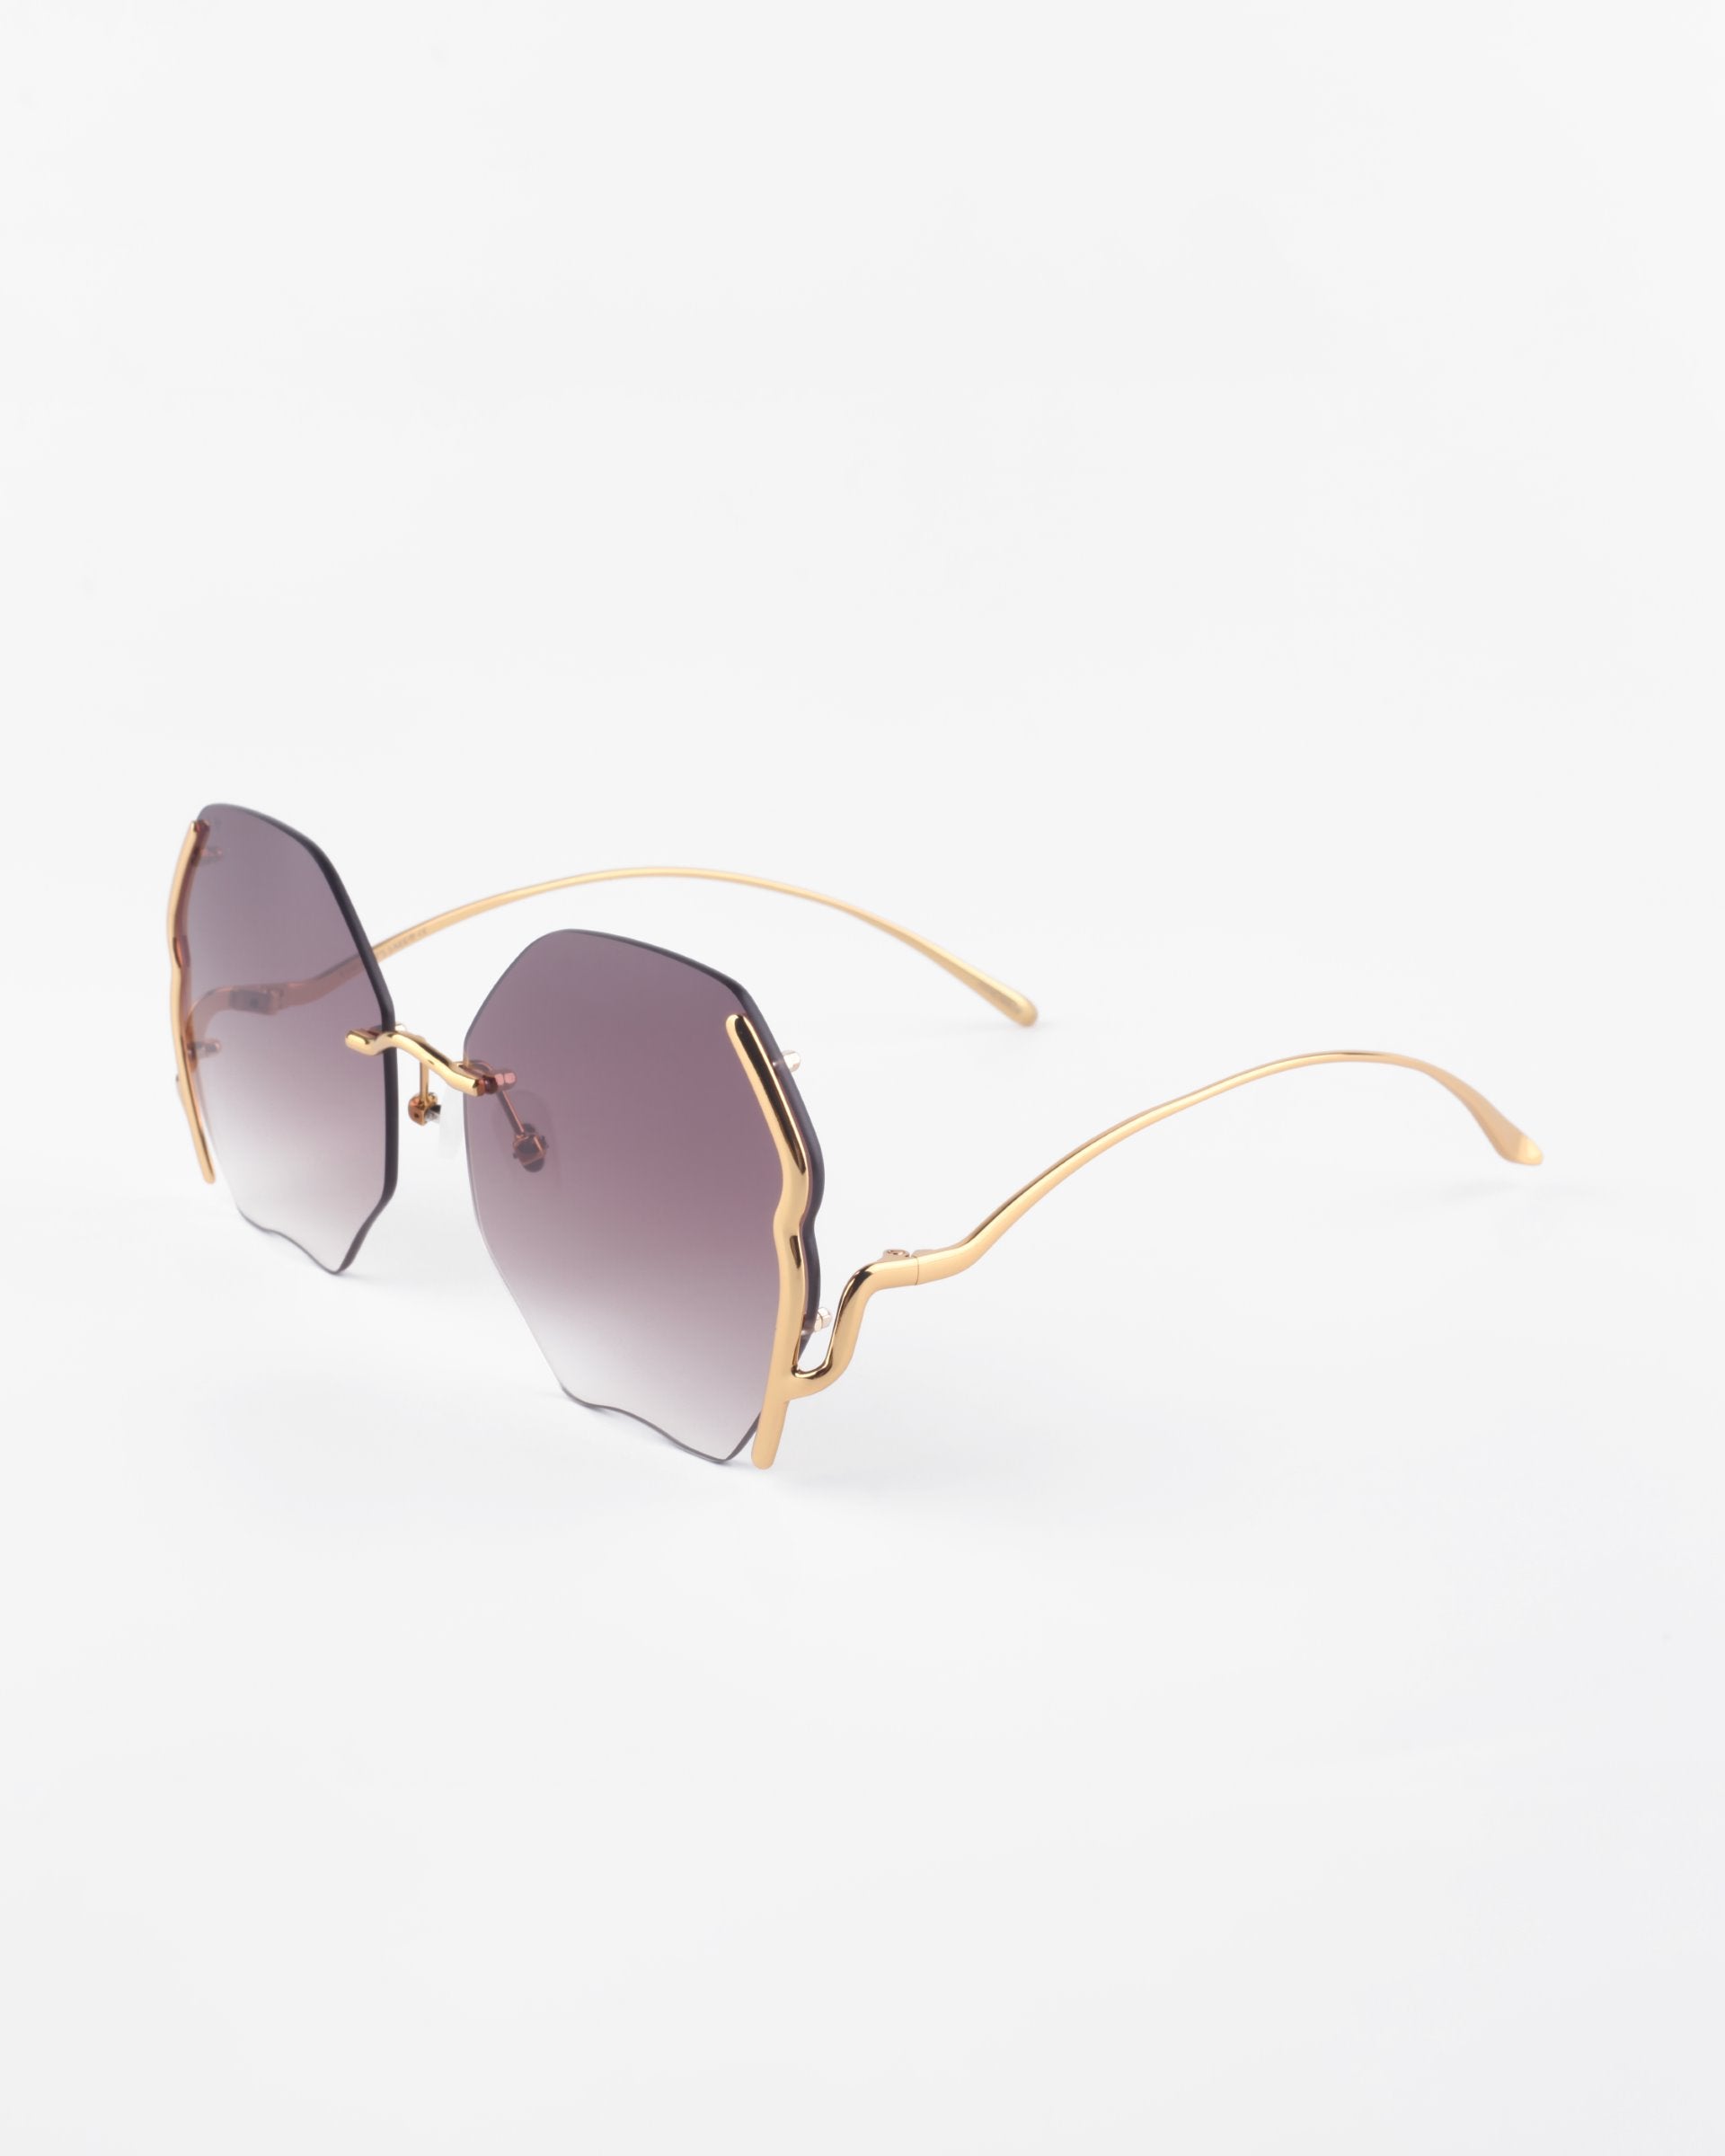 A pair of Century sunglasses from For Art's Sake® with irregularly shaped, lightly tinted lenses and thin, gold-plated stainless steel frames. The lenses have a gradient from dark to light tint, offering 100% UVA & UVB protection. The overall design is modern and stylish.